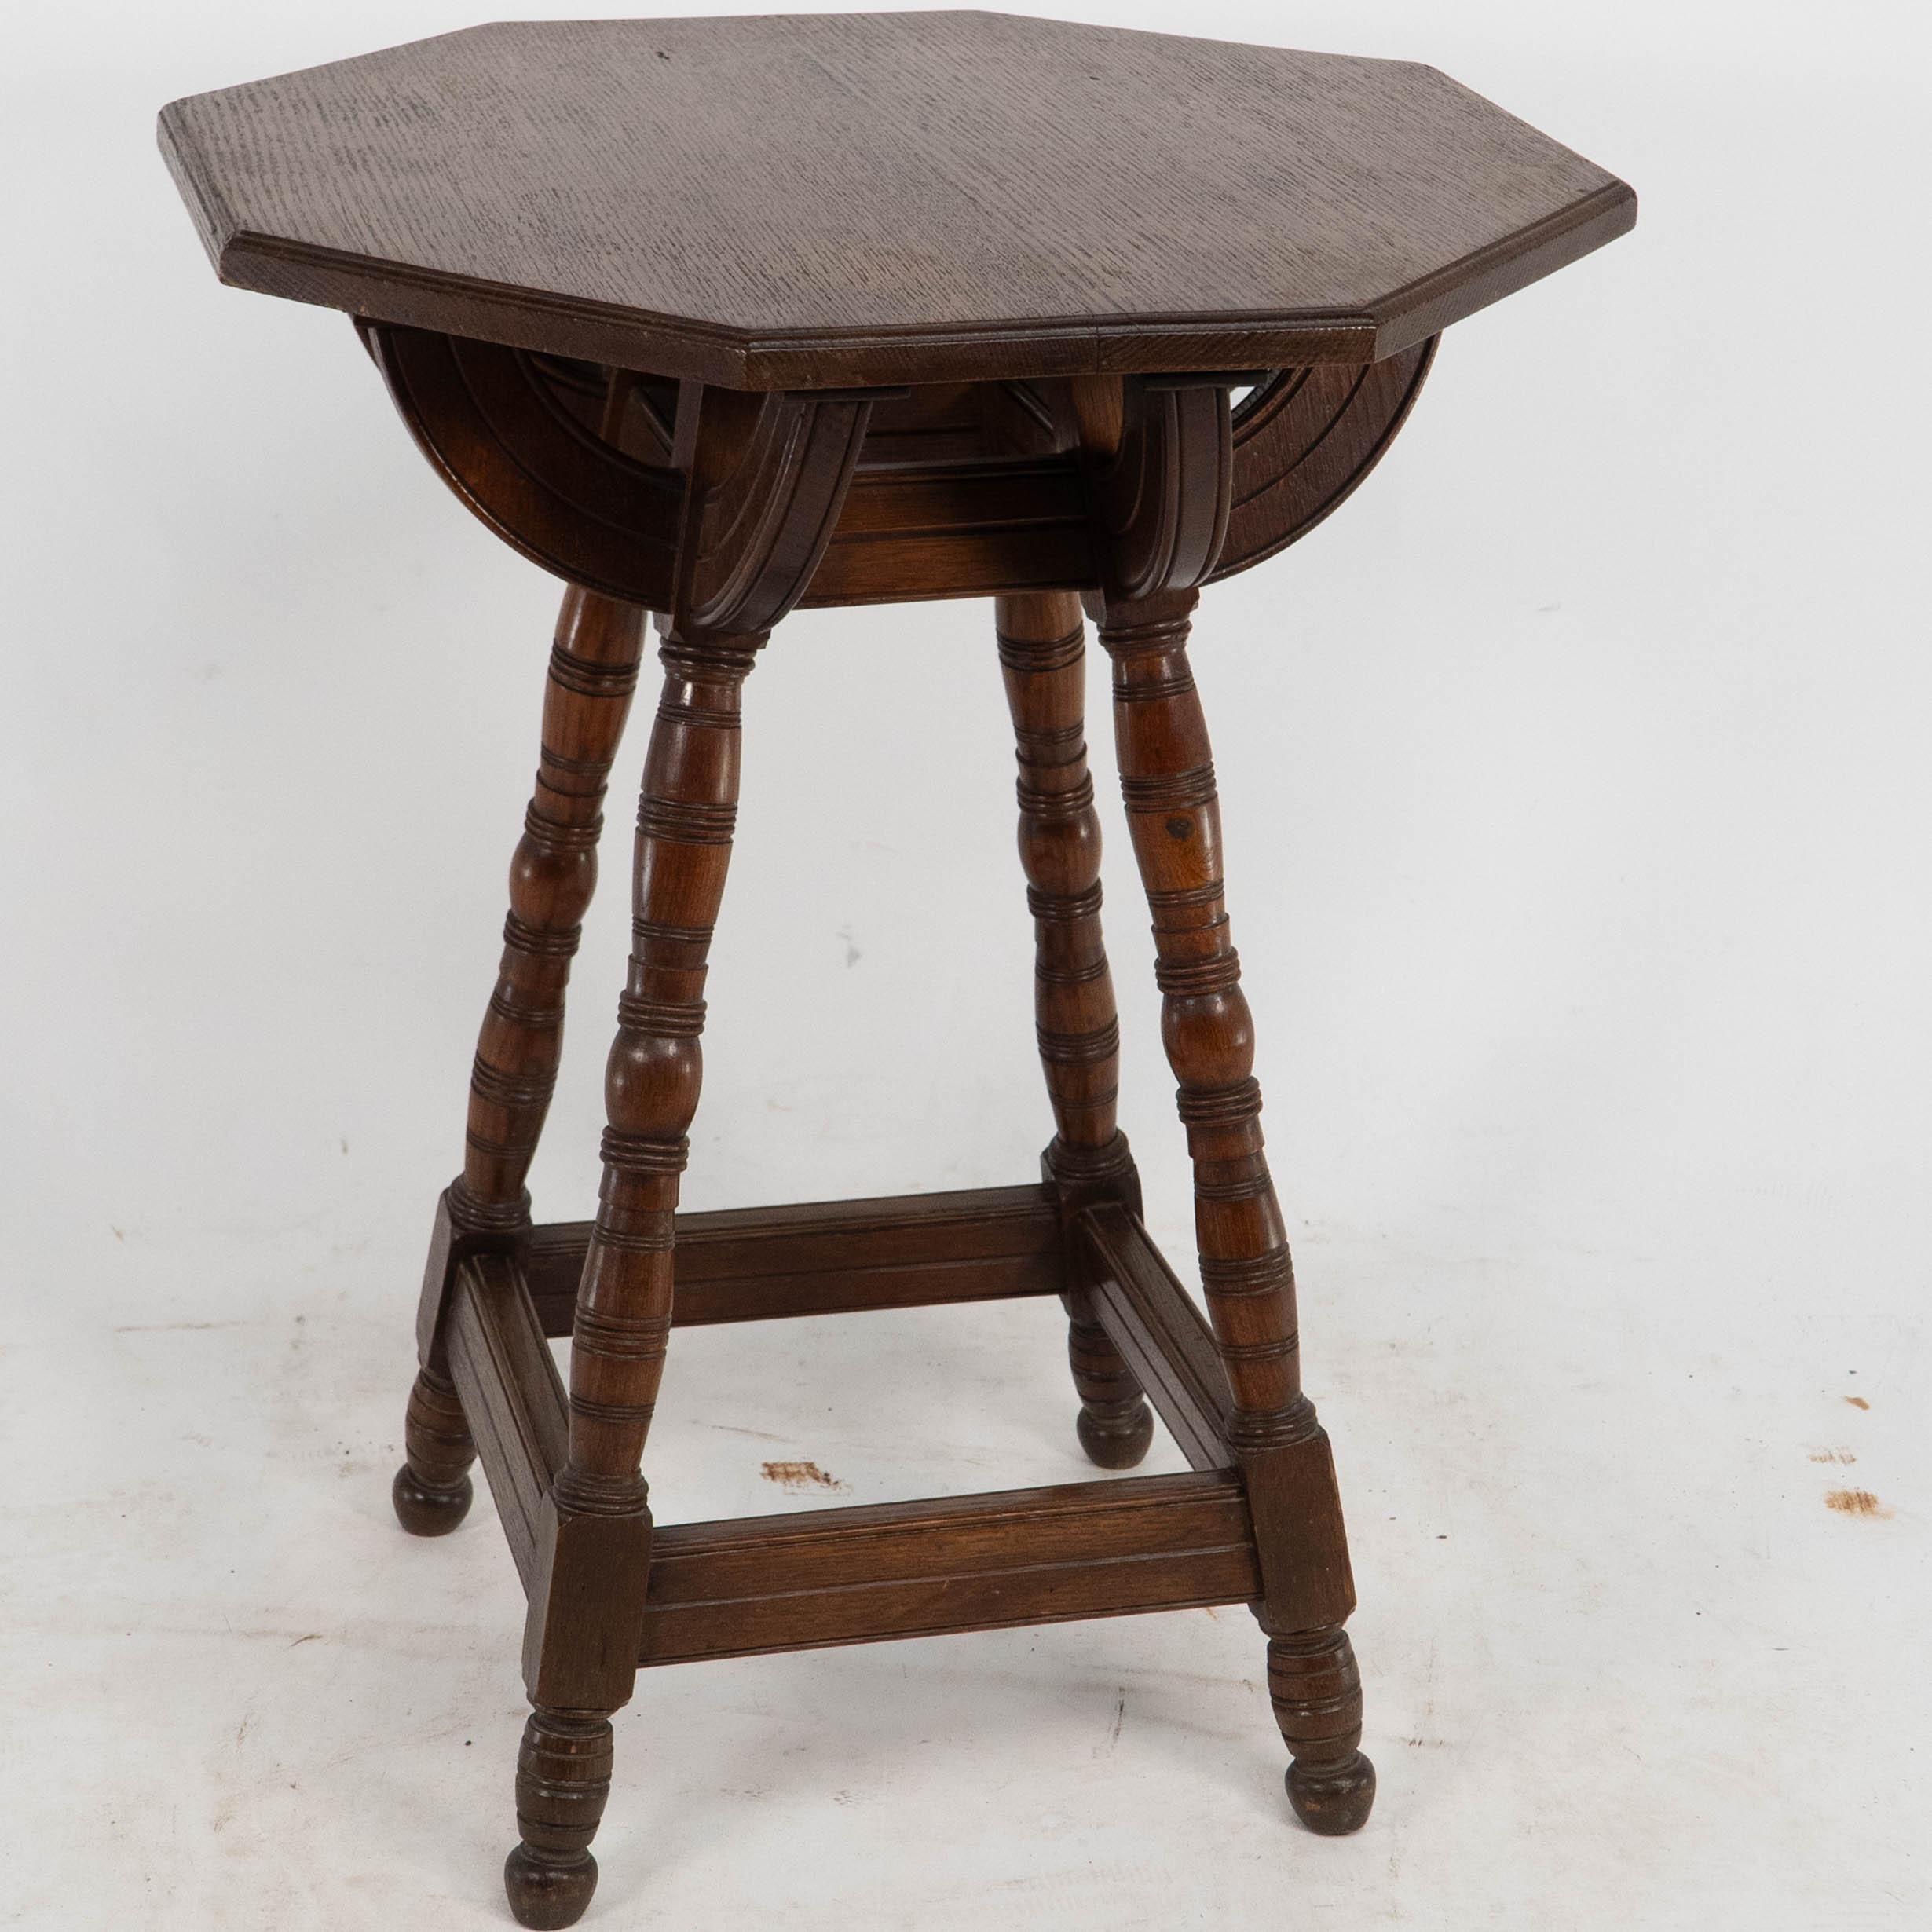 Collier and Plucknett. A rare Gothic Revival oak side table For Sale 2